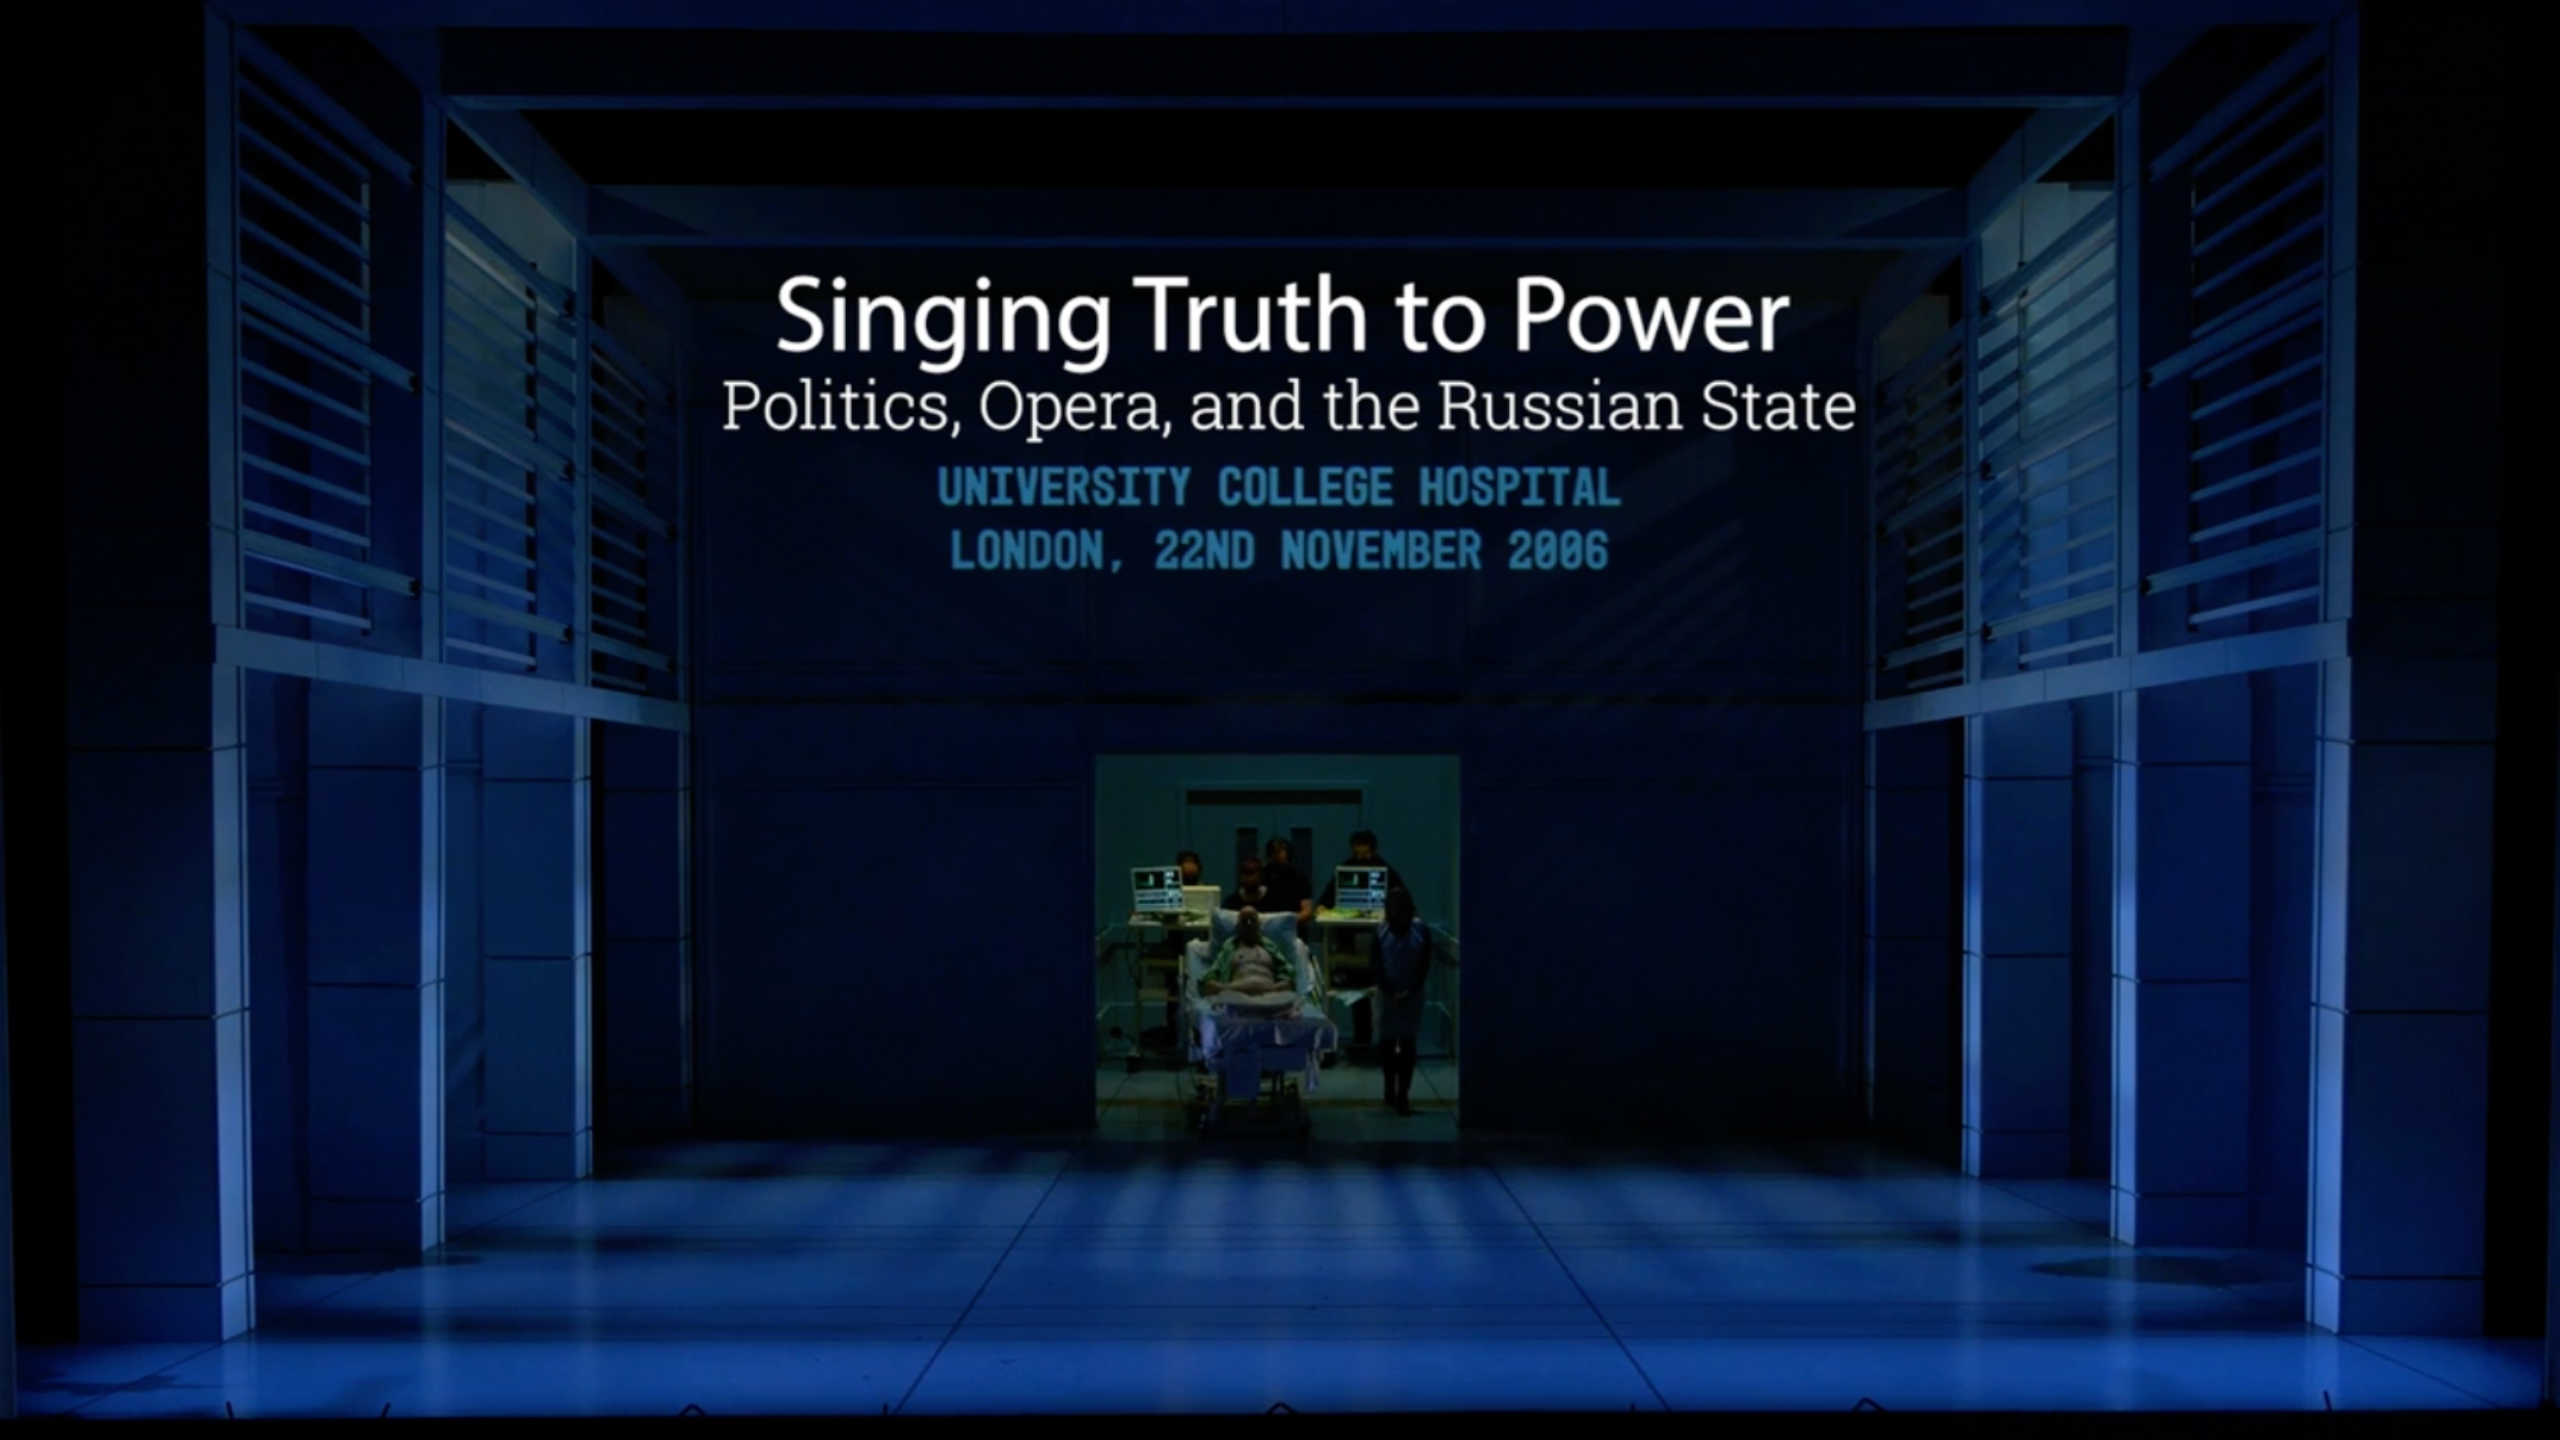 Singing Truth to Power: Politics, Opera, and the Russian State